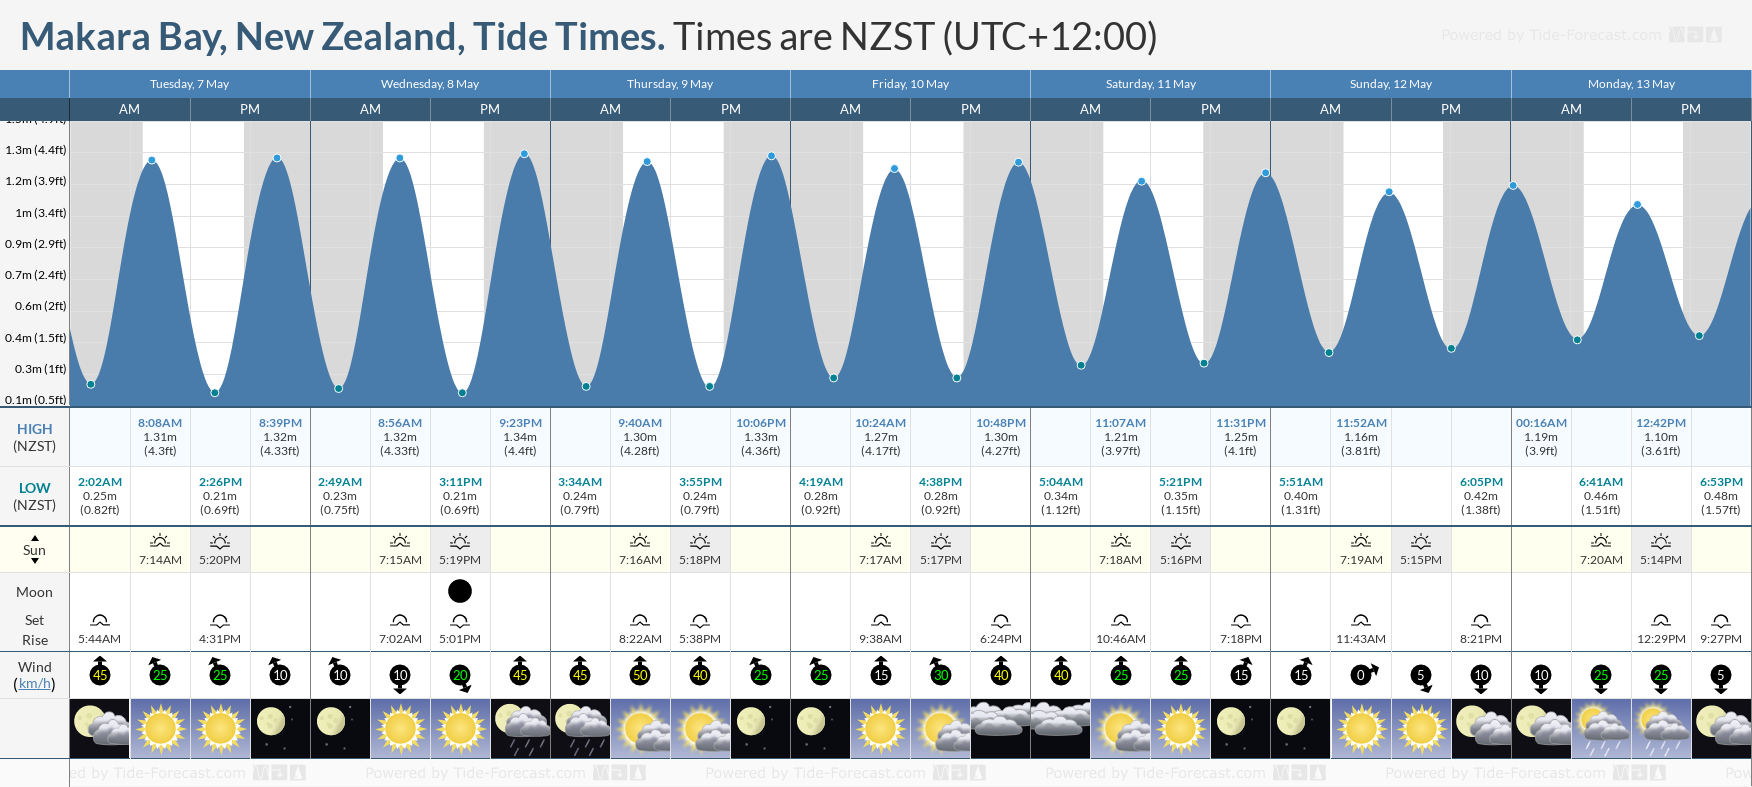 Makara Bay, New Zealand Tide Chart including high and low tide times for the next 7 days